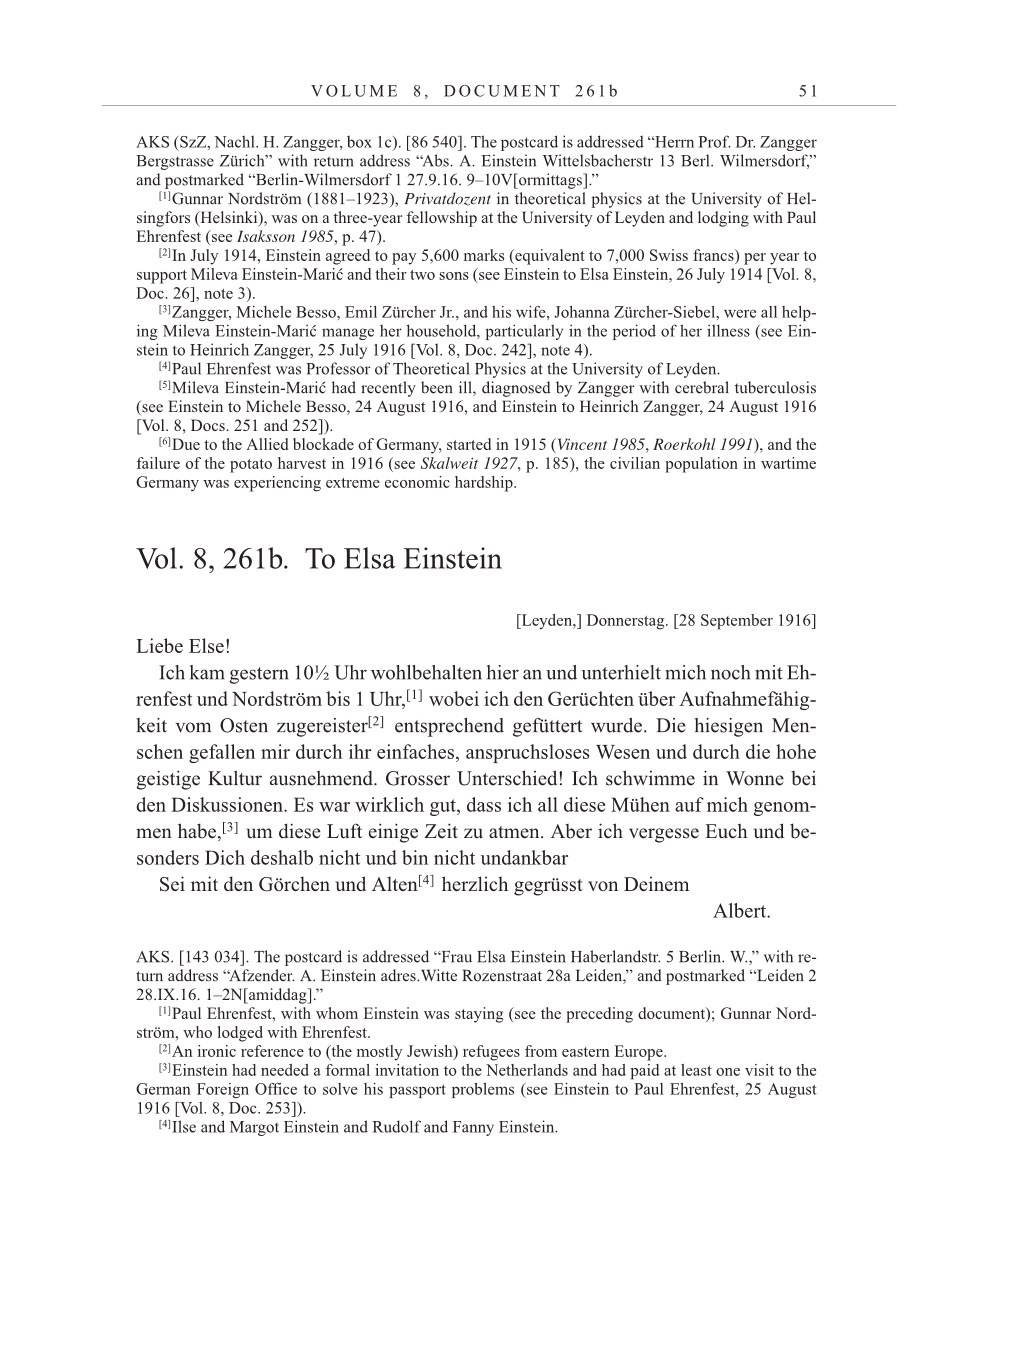 Volume 10: The Berlin Years: Correspondence May-December 1920 / Supplementary Correspondence 1909-1920 page 51